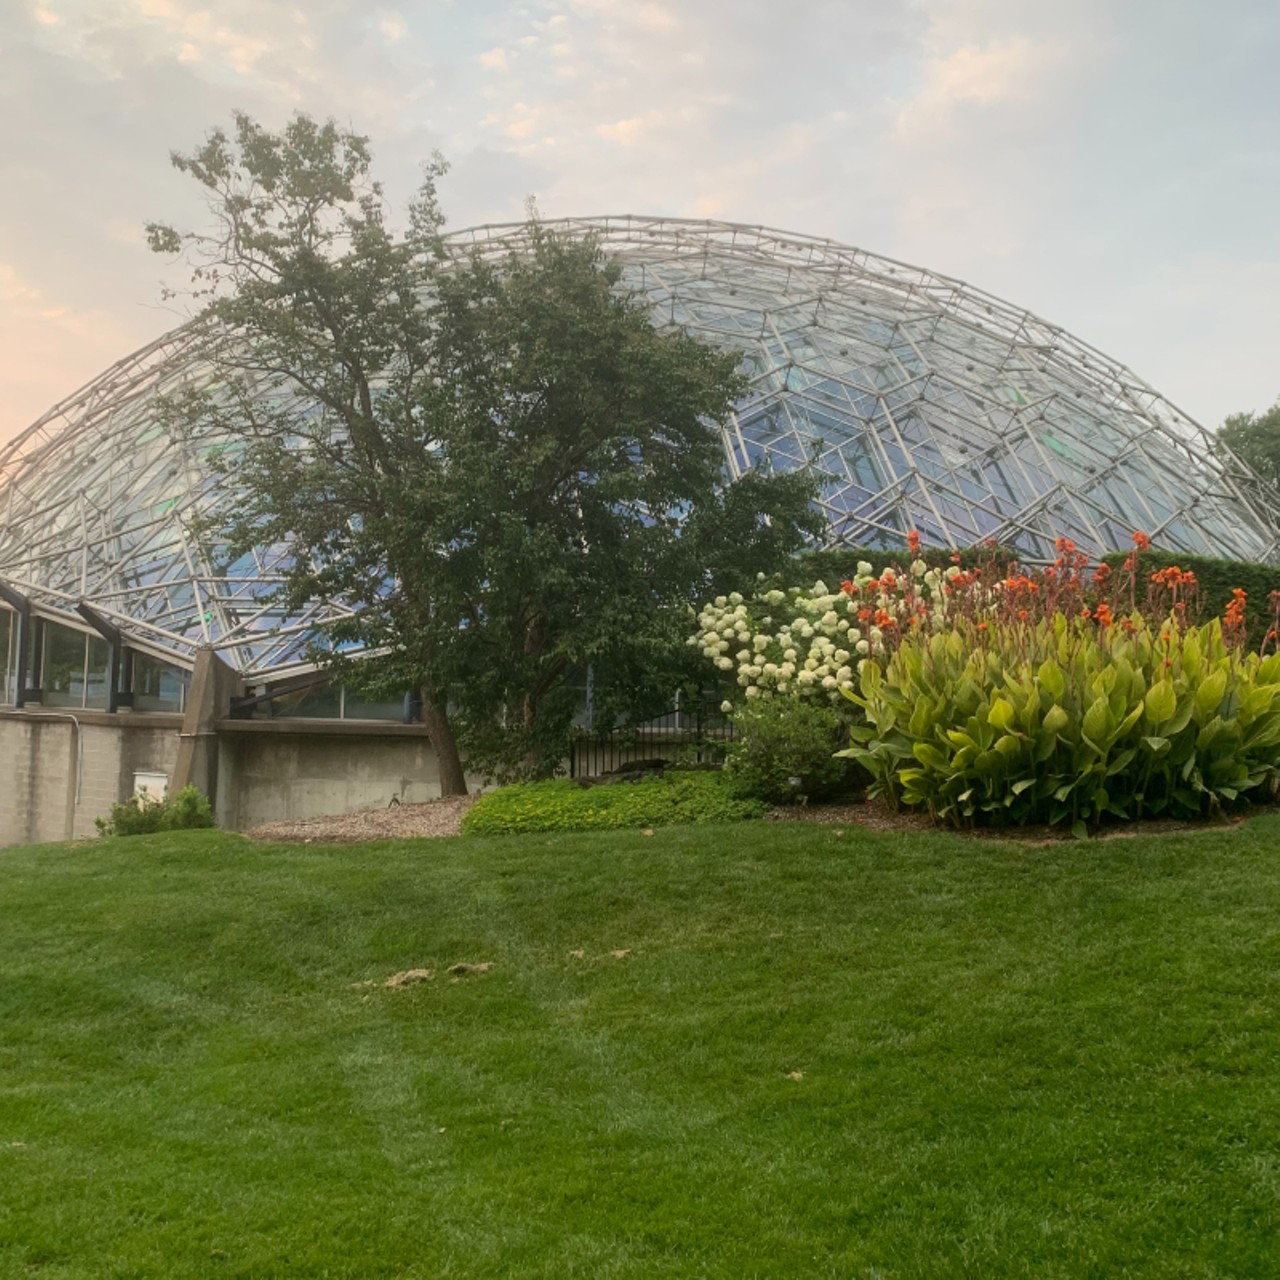 The Missouri Botanical Garden's Origami Exhibit Is a Must See [PHOTOS]